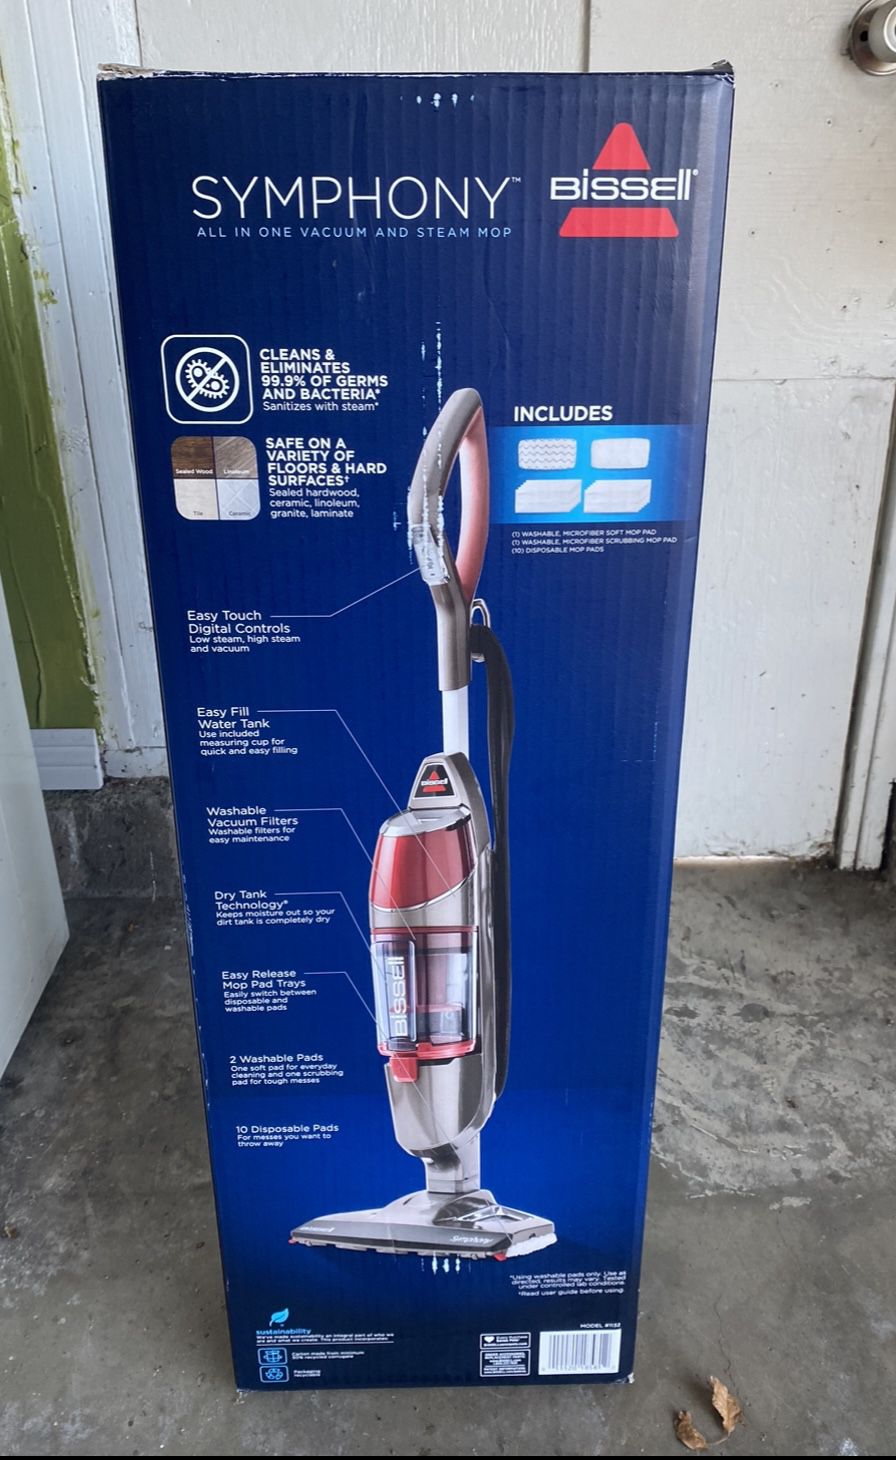 all in one Vacuum & Steam Mop